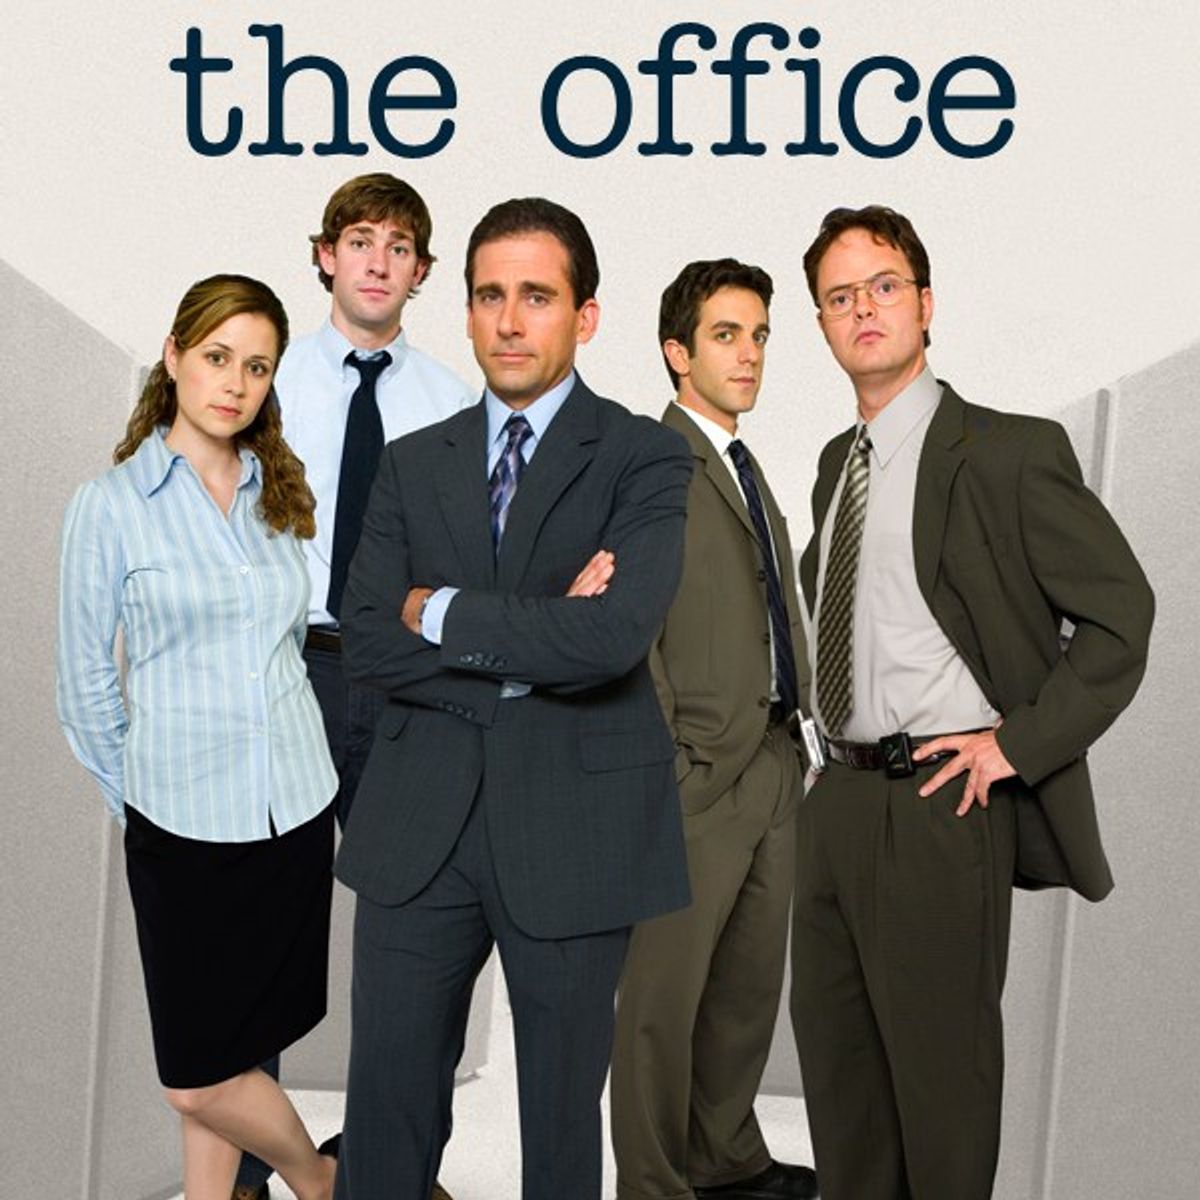 Top 20 Funniest "The Office" Moments